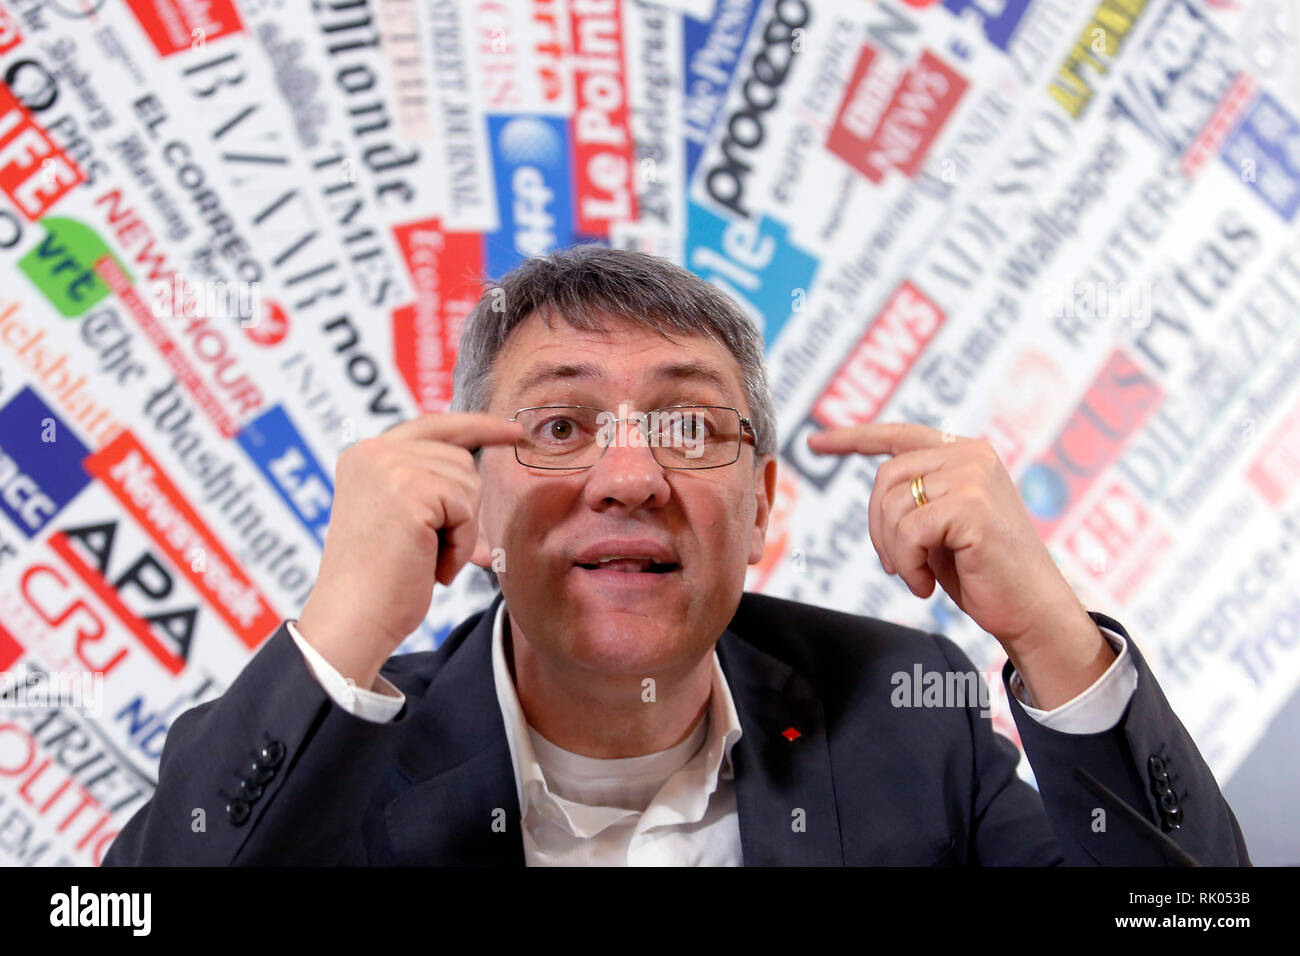 Maurizio Landini Rome February 8th 2019. Press conference of the newly elected secretary of CGIL trade union, the biggest syndicate in Italy. Foto Samantha Zucchi Insidefoto Stock Photo